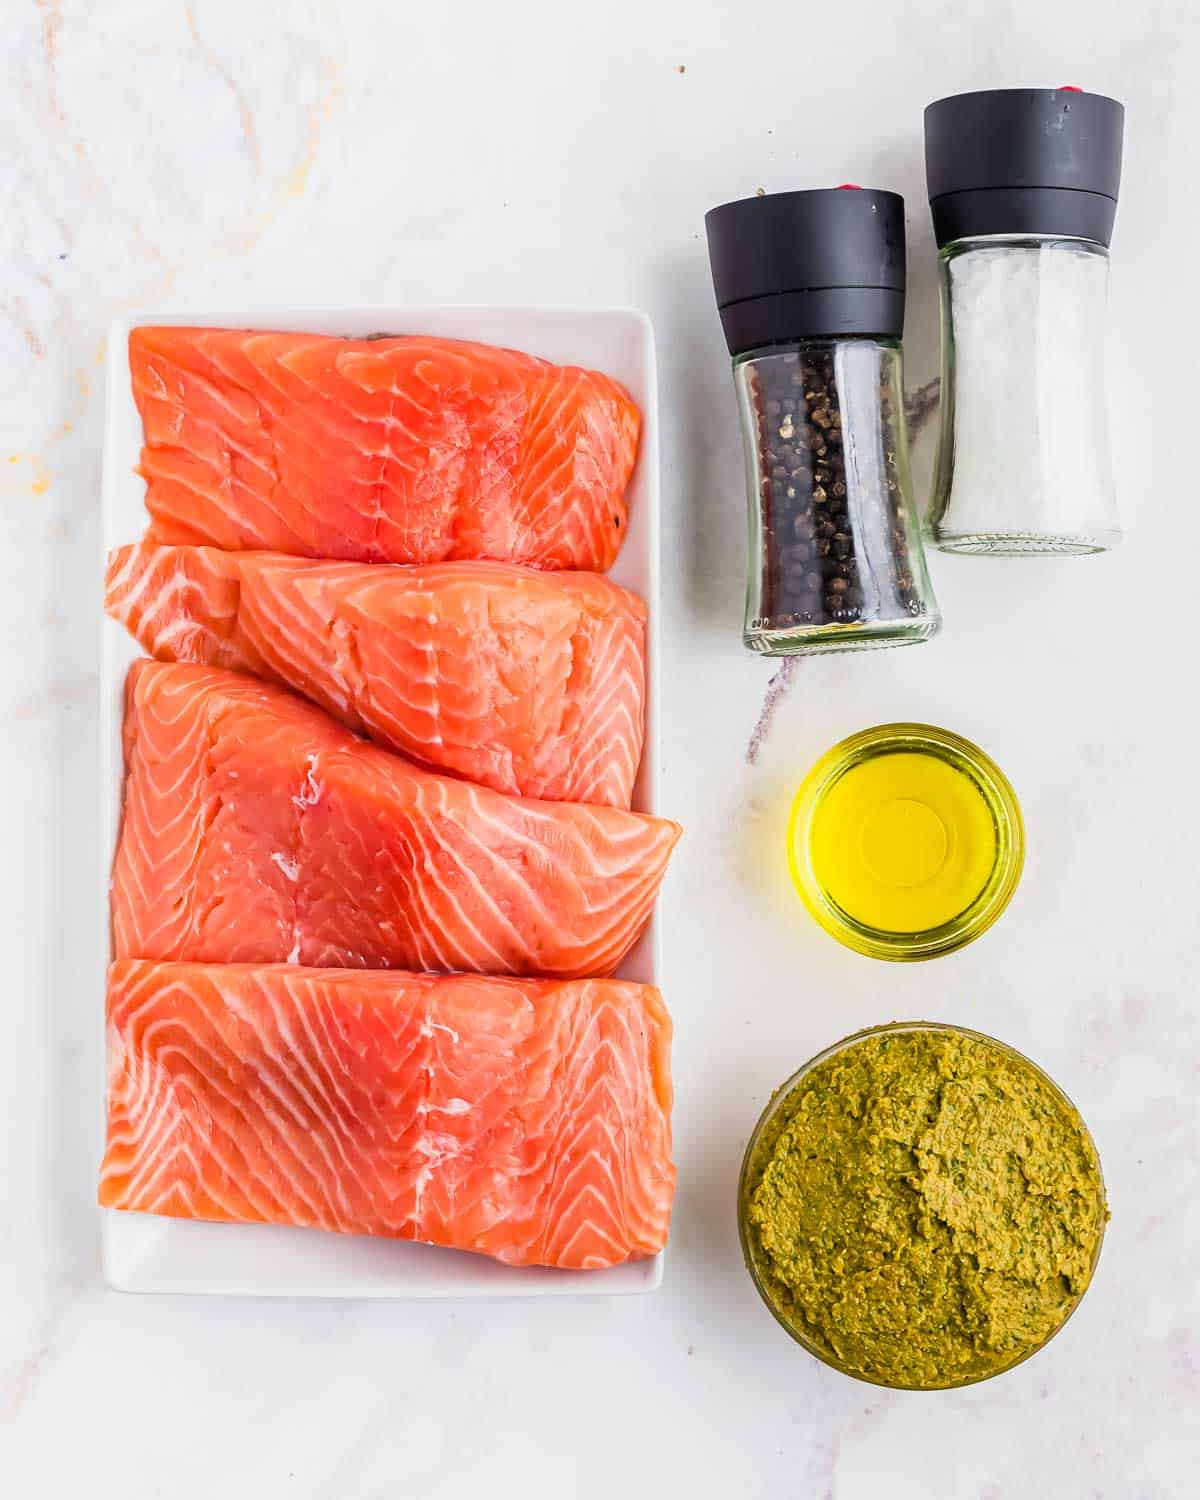 A plate of raw salmon with a small bowl of pesto, salt and pepper shakers and olive oil.